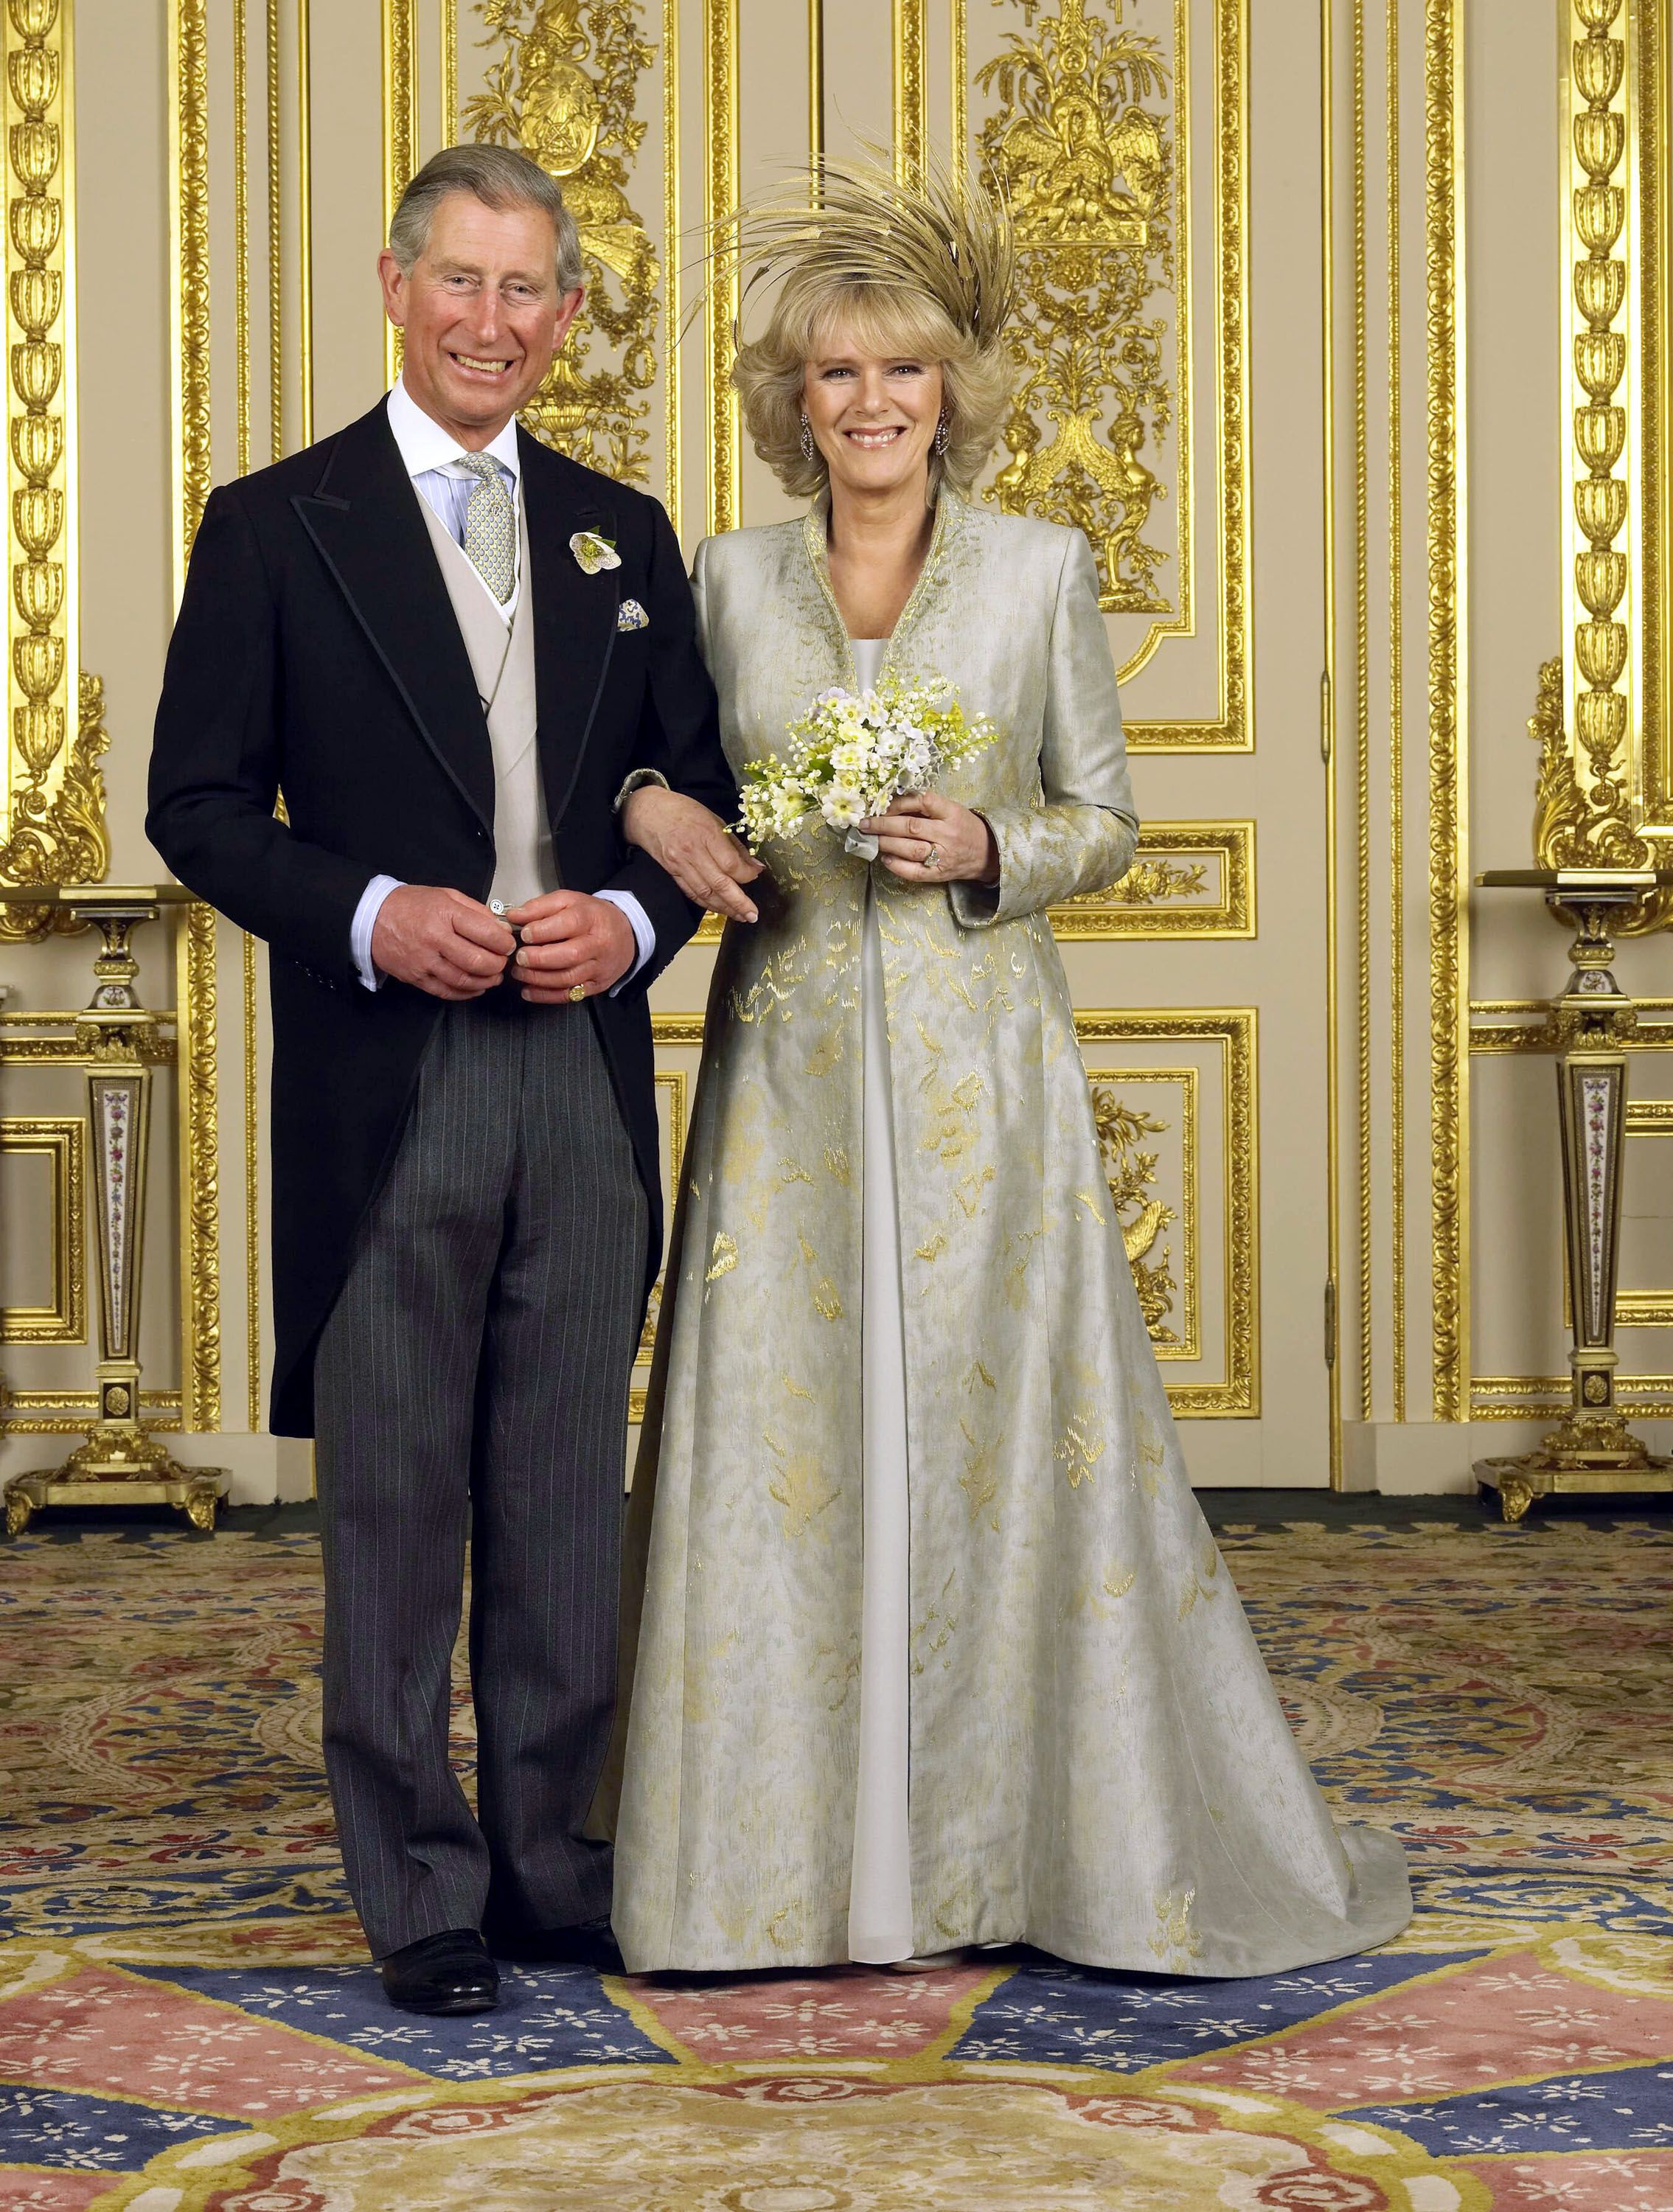 Prince Charles and Camilla Parker Bowles in the White Drawing Room at Windsor Castle Saturday April 9 2005, after their wedding ceremony. | Source: Getty Images